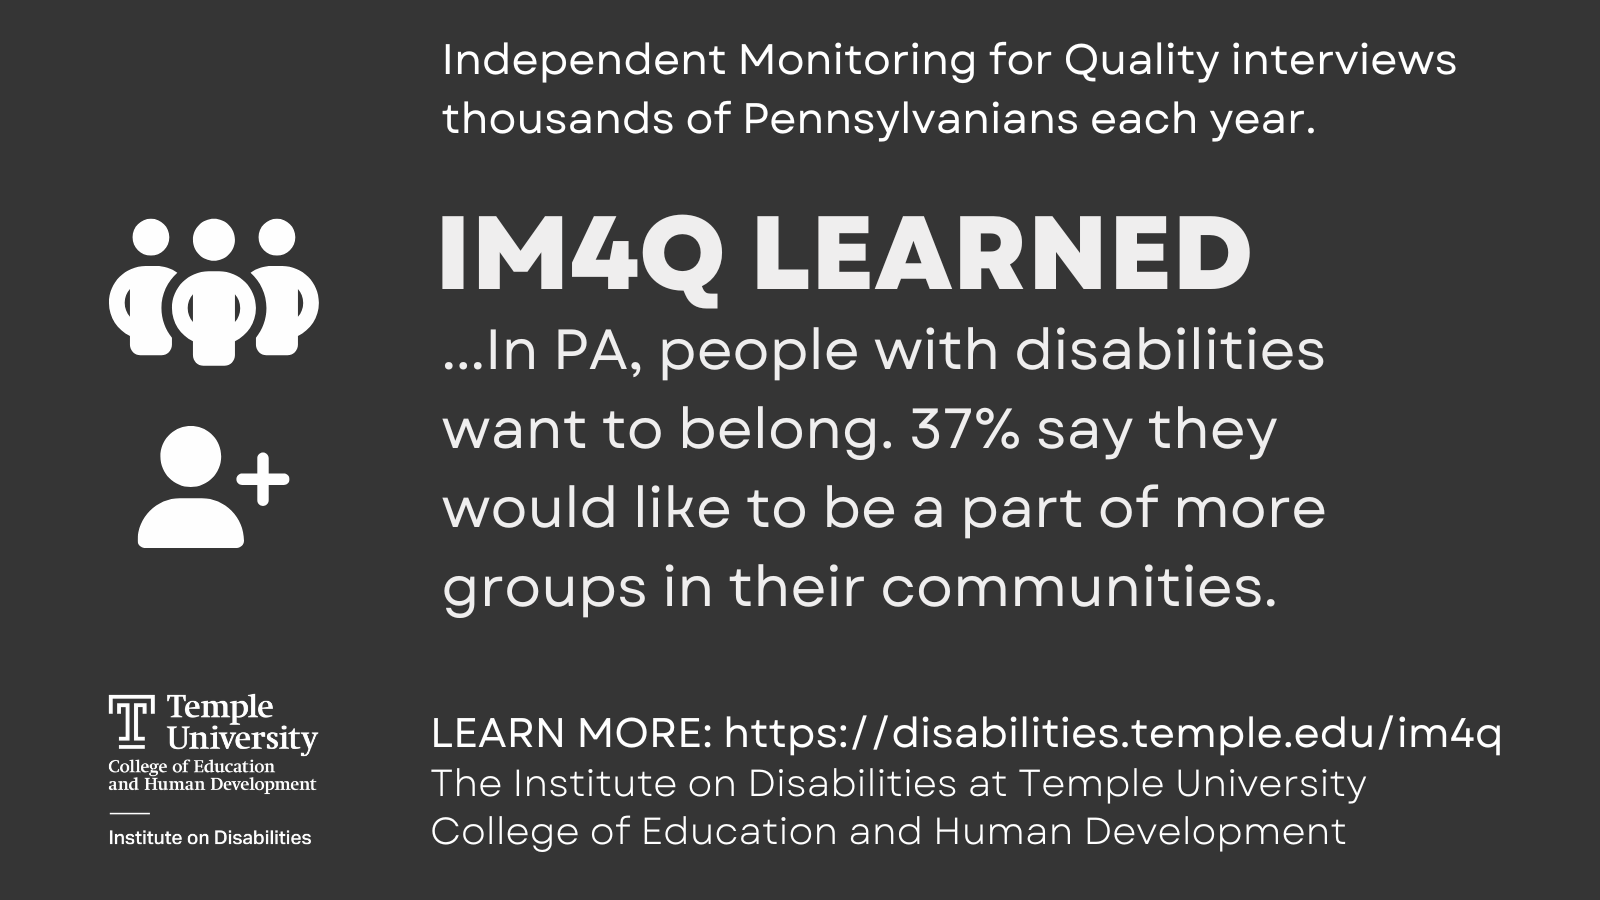 In PA, people with disabilties want to belong. 37% say they would like to be a part of more groups in their communities.